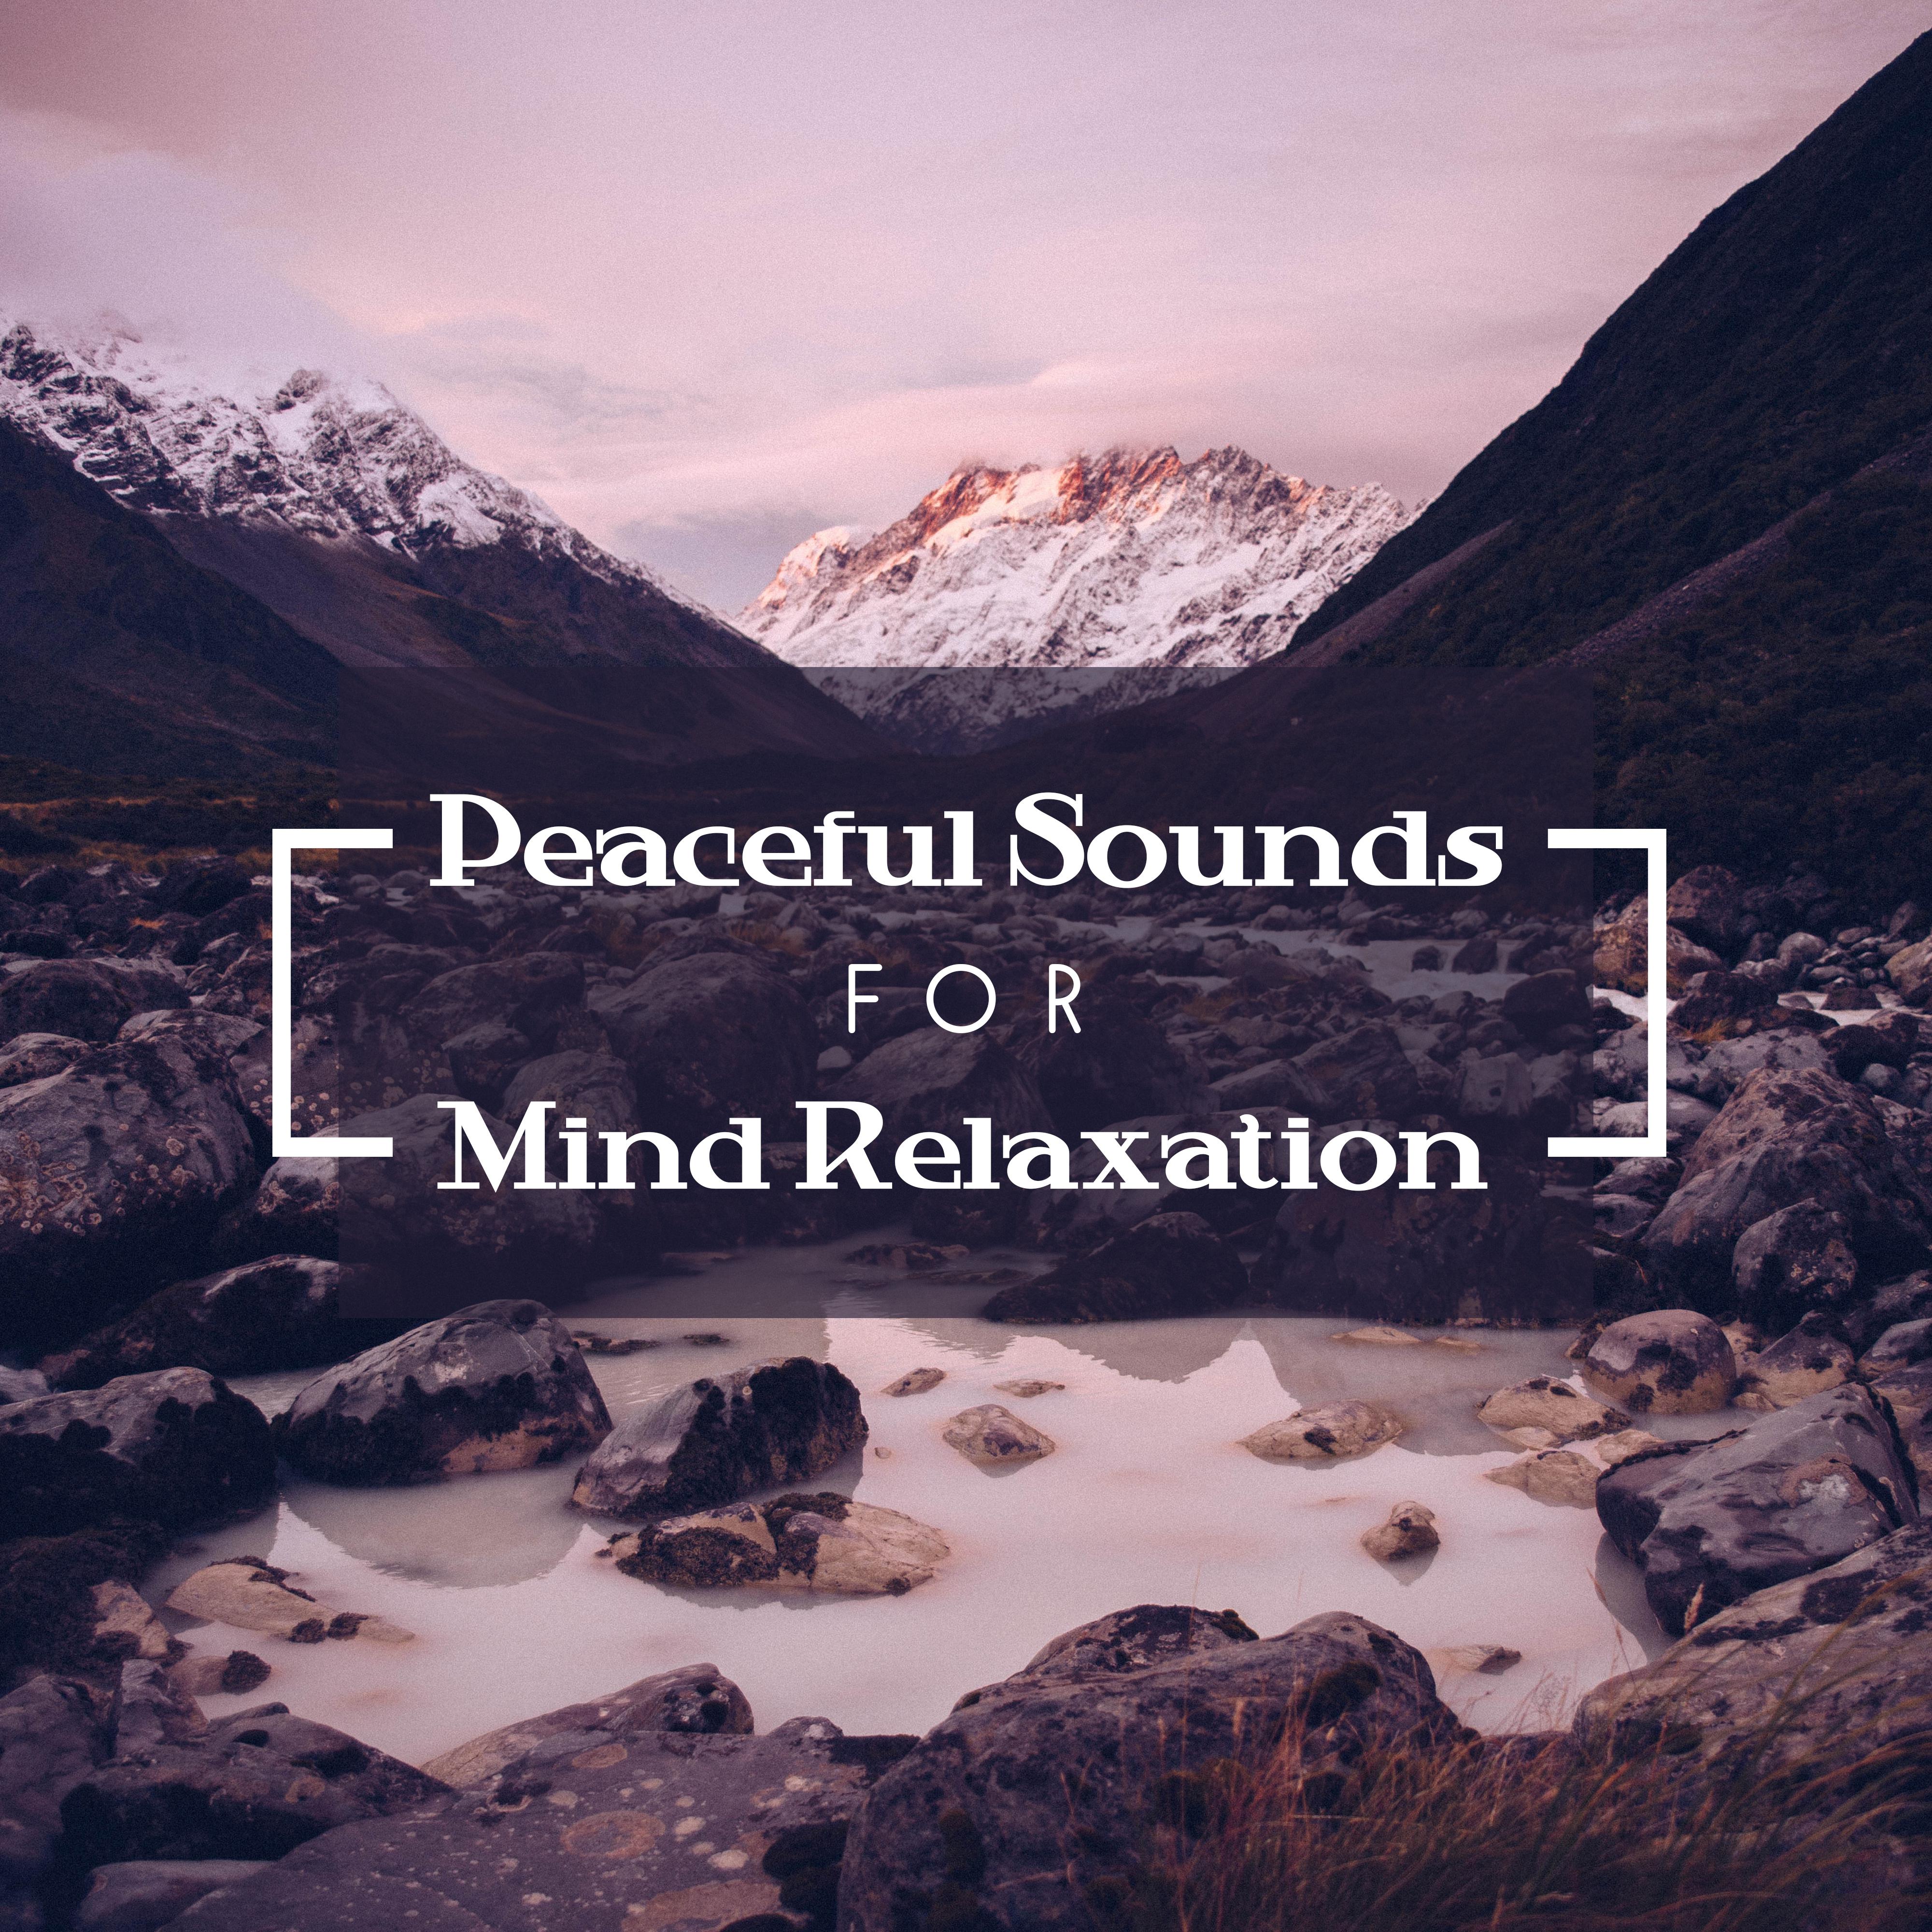 Peaceful Sounds for Mind Relaxation